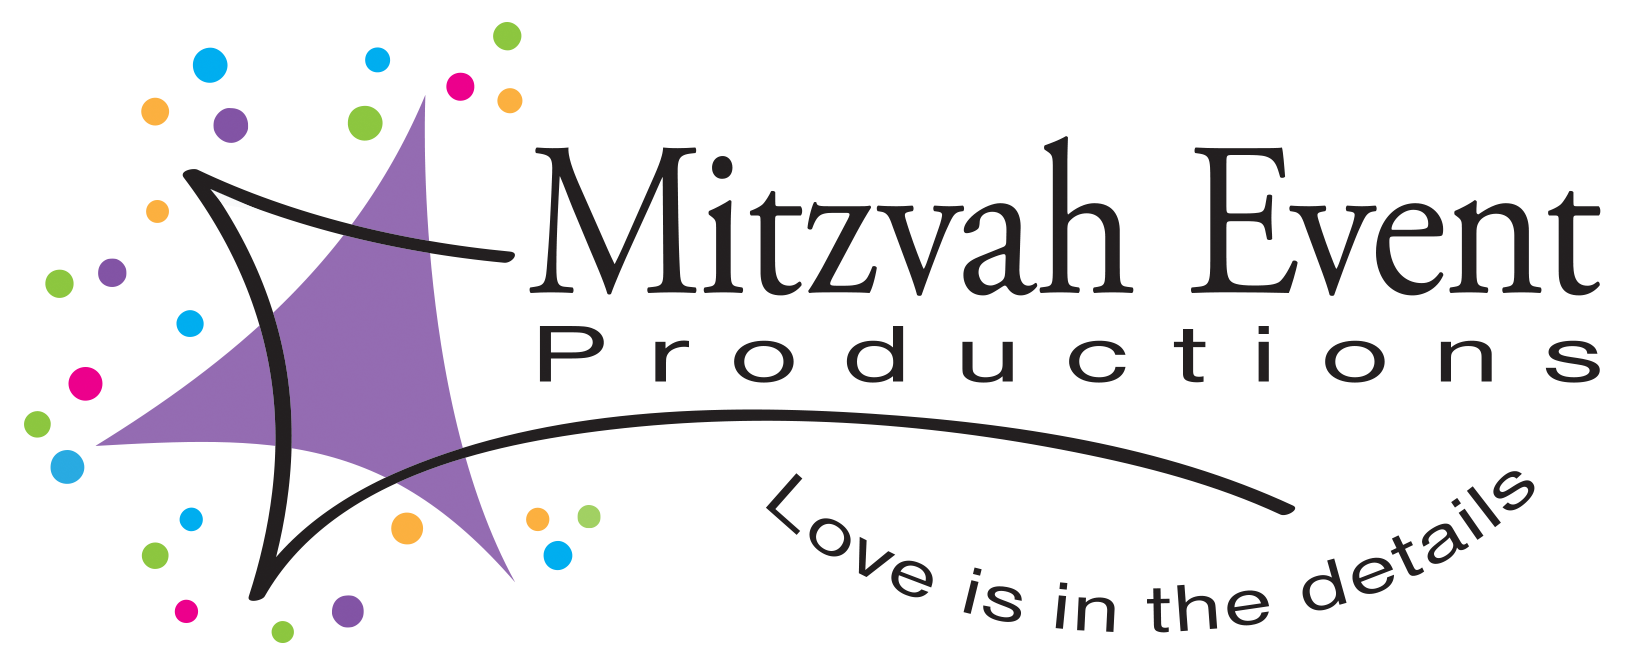 Mitzvah Event Productions Logo